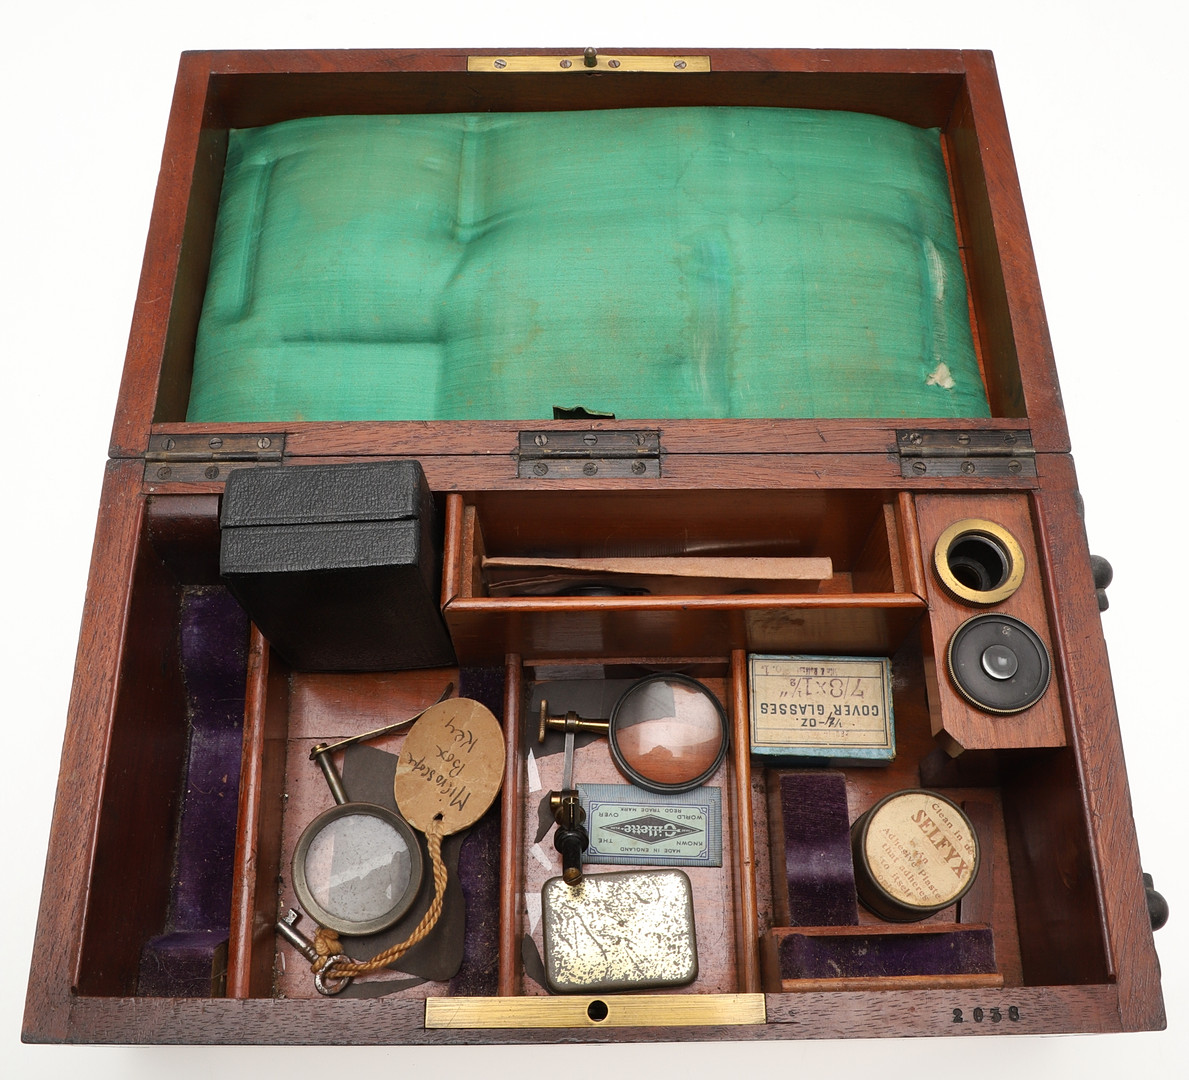 CONSTANT VERICK. A FRENCH LATE 19TH CENTURY CASED MICROSCOPE. - Image 10 of 18